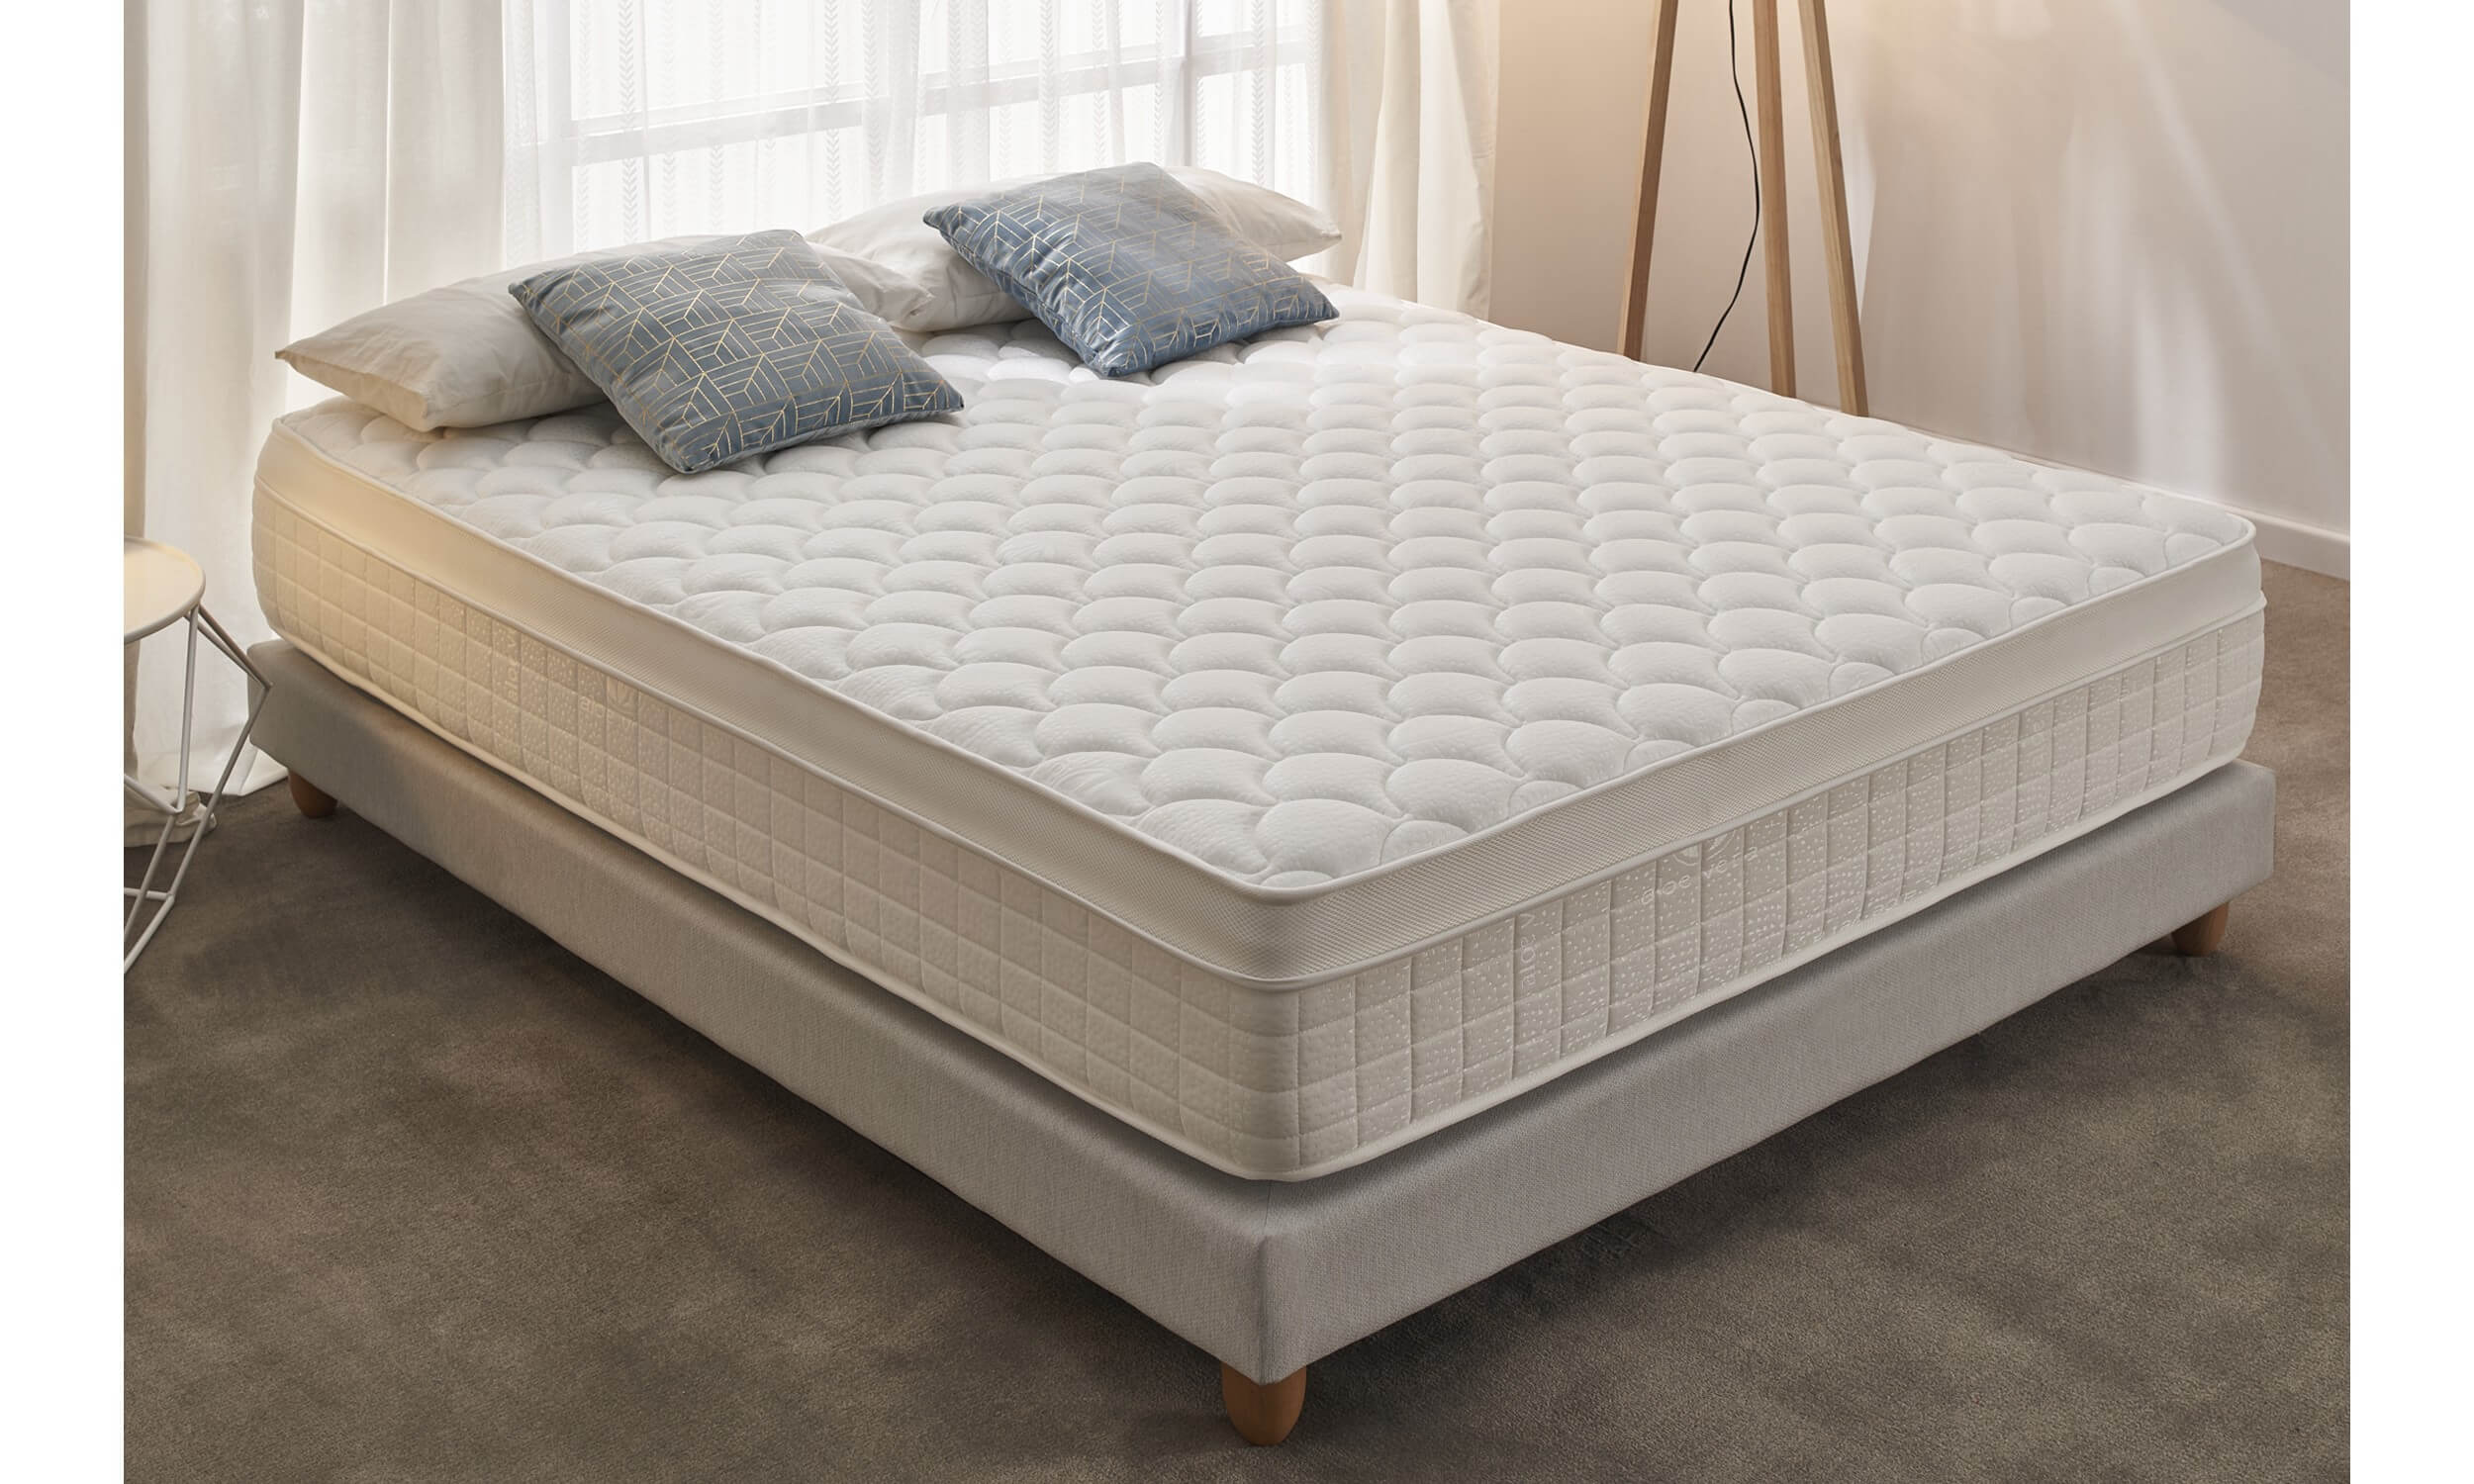 other options for mattress box spring